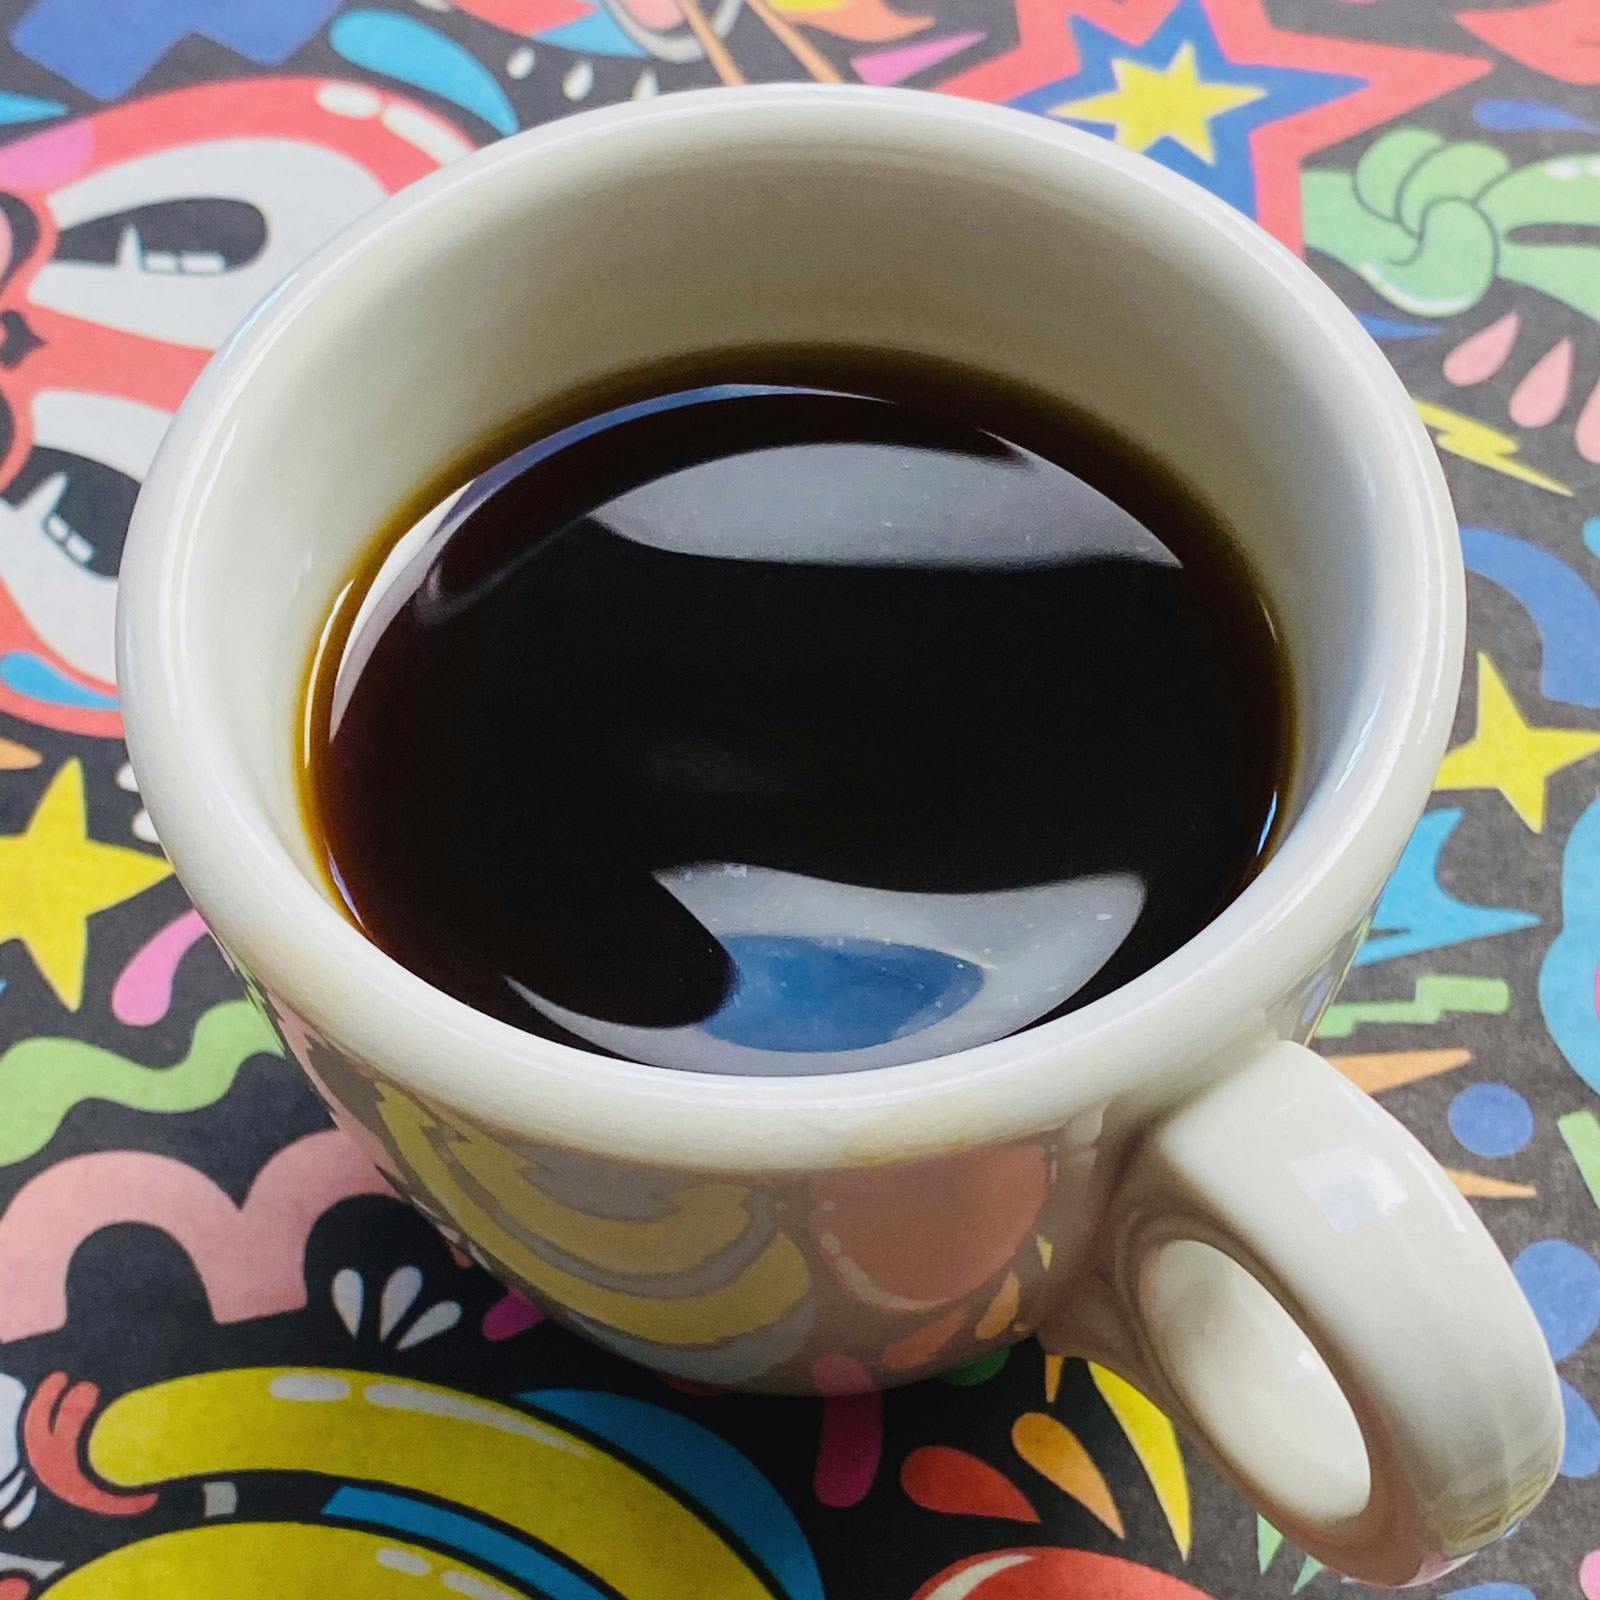 A hot cup of YES PLZ Coffee with a colorful background